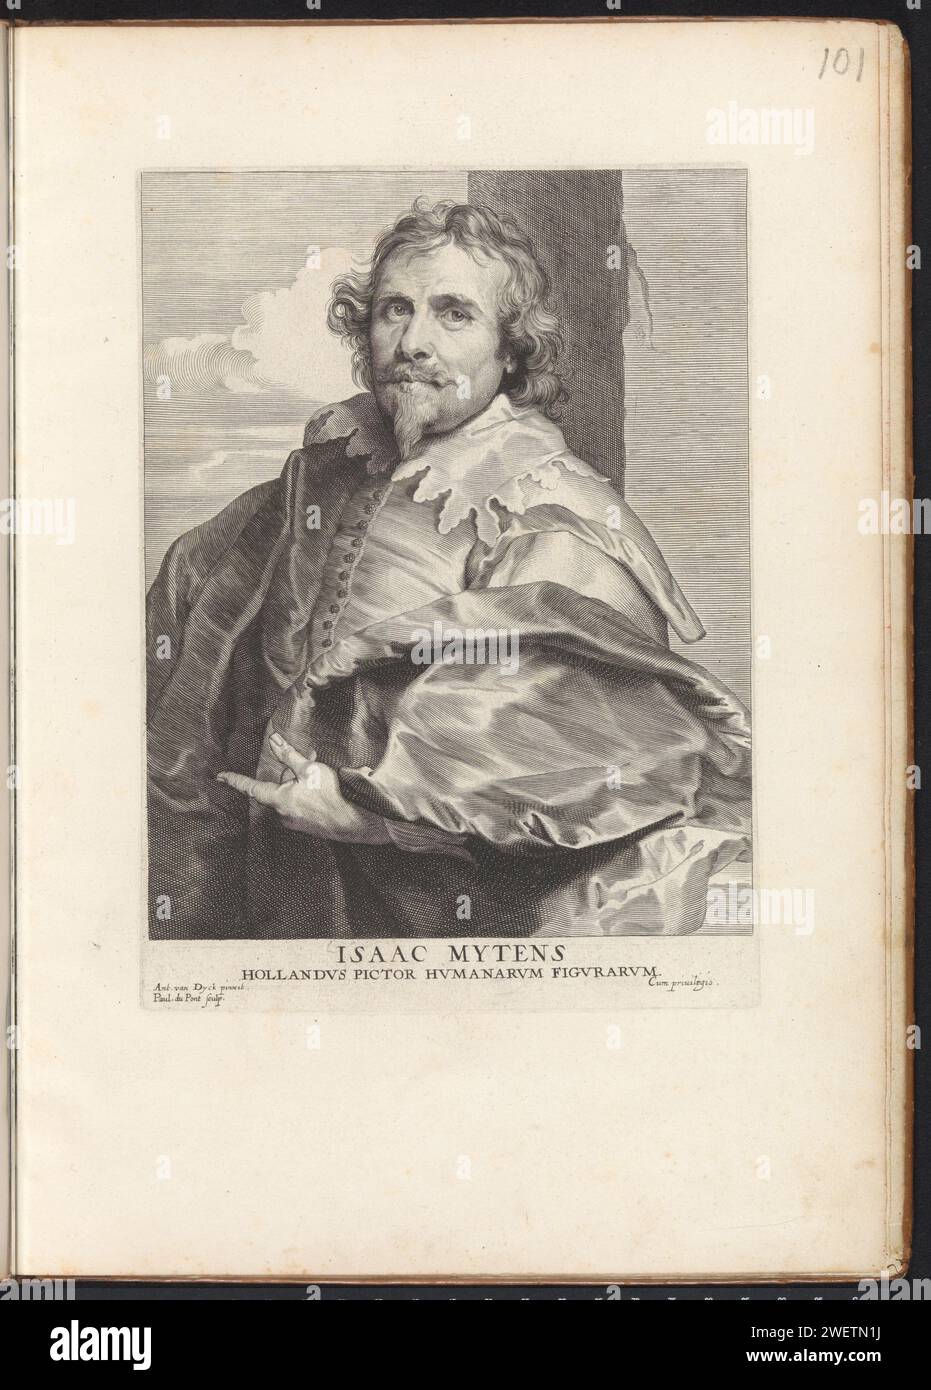 Portrait of the painter Daniël Mijtens, 1645 - 1646 print Portrait of Daniël Mijtens, court painter of Karel I, king of England. The first name of the person portrayed in the caption is incorrect. This print is part of an album.  paper engraving portrait, self-portrait of painter Stock Photo